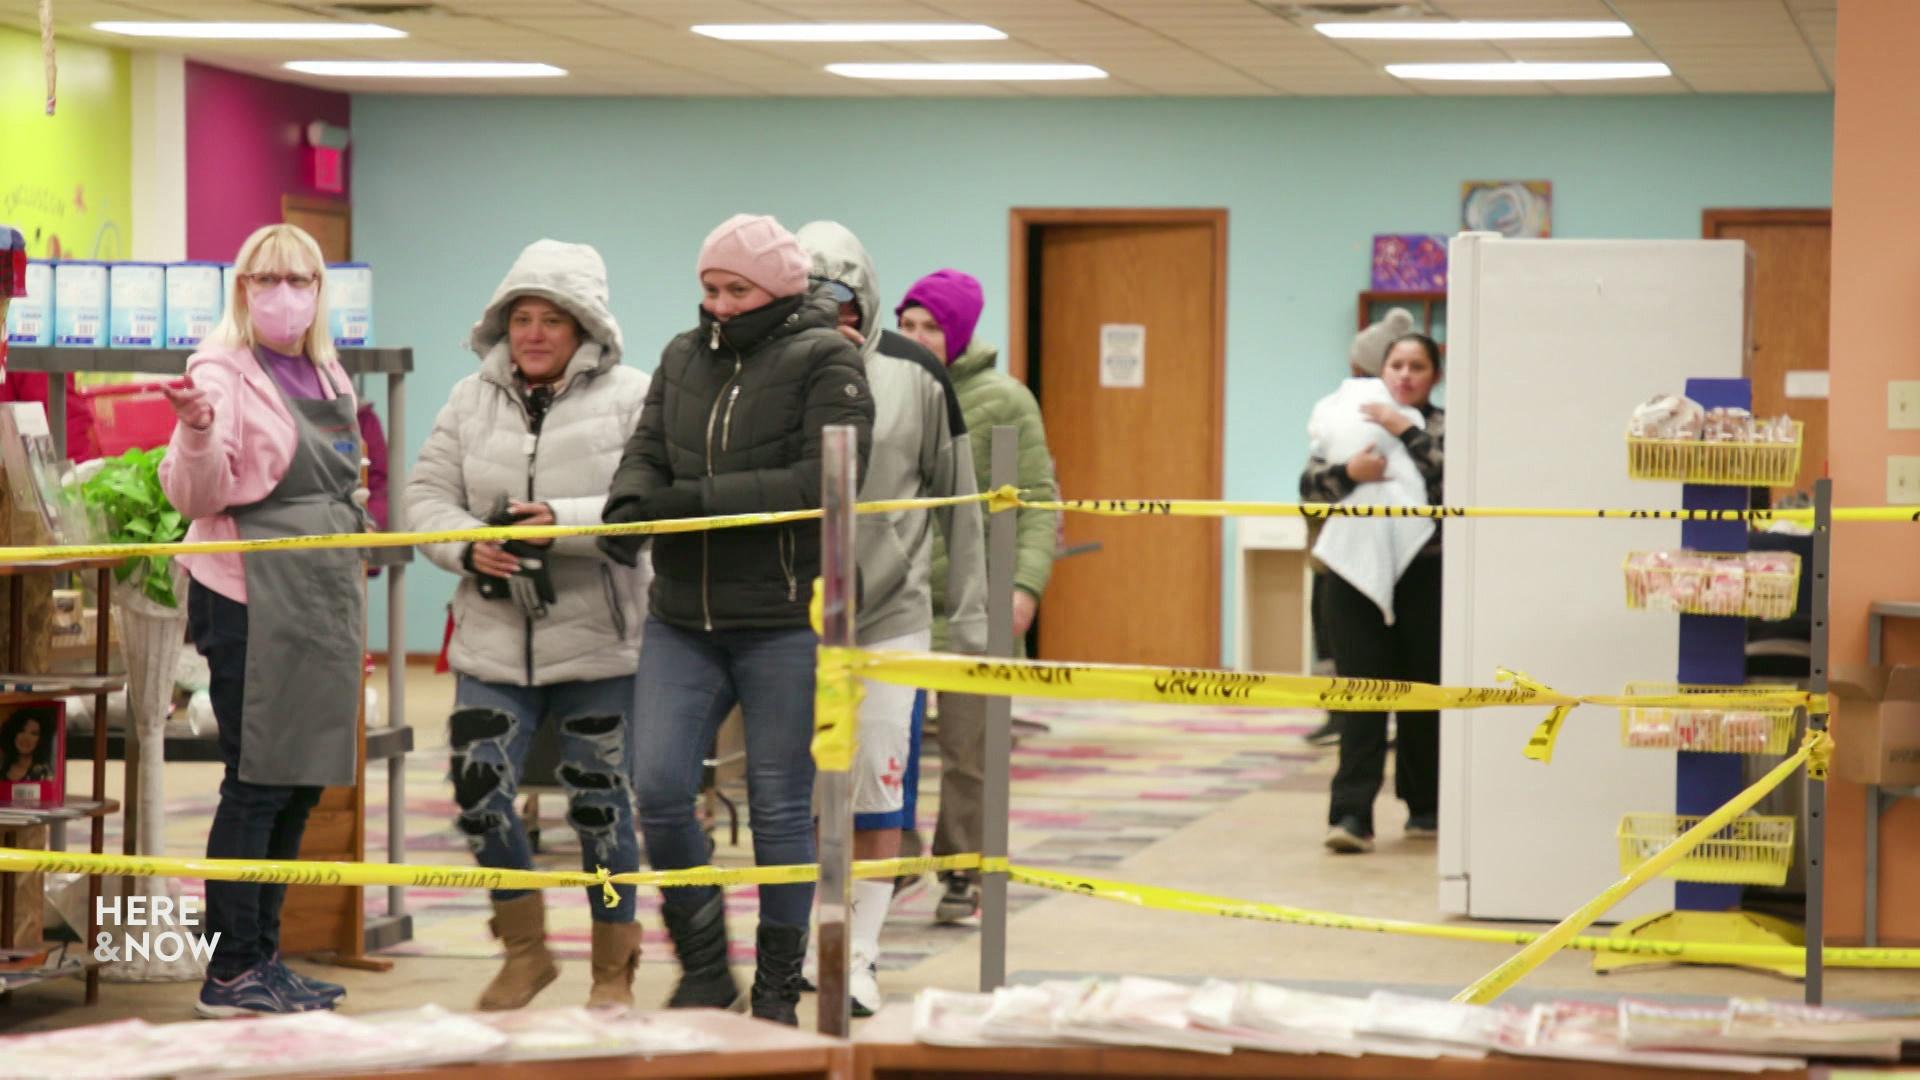 A still image shows a group of people wearing winter jackets and standing in front of yellow 'caution' tape.